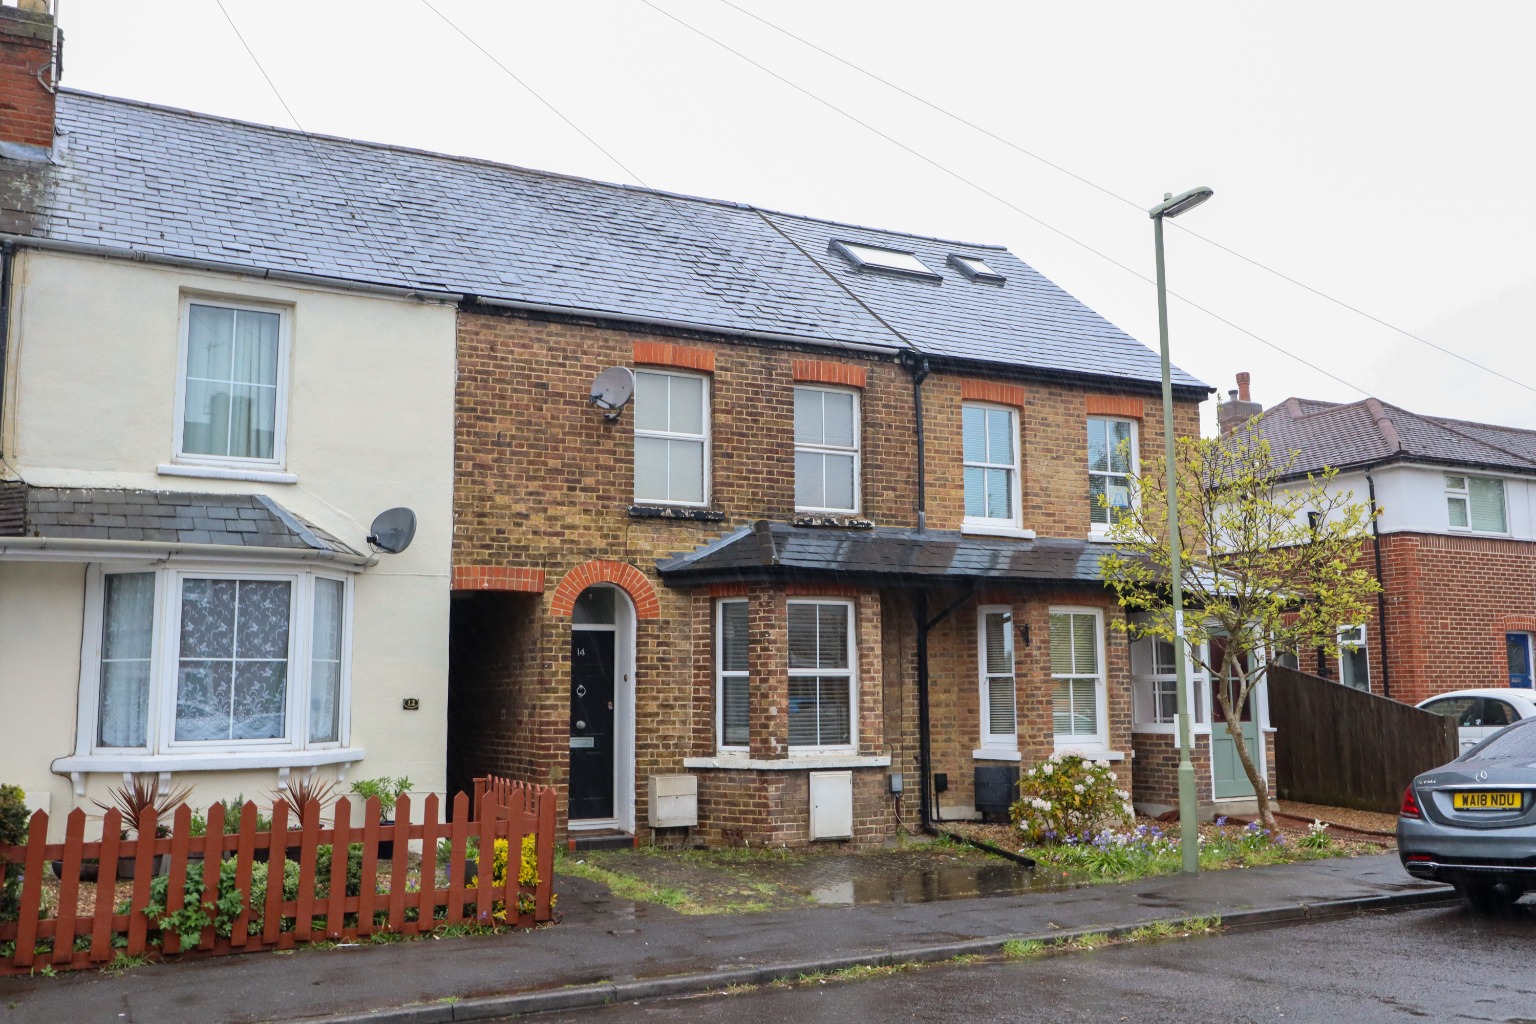 2 bed terraced house for sale in Yetminster Road, Farnborough, GU14